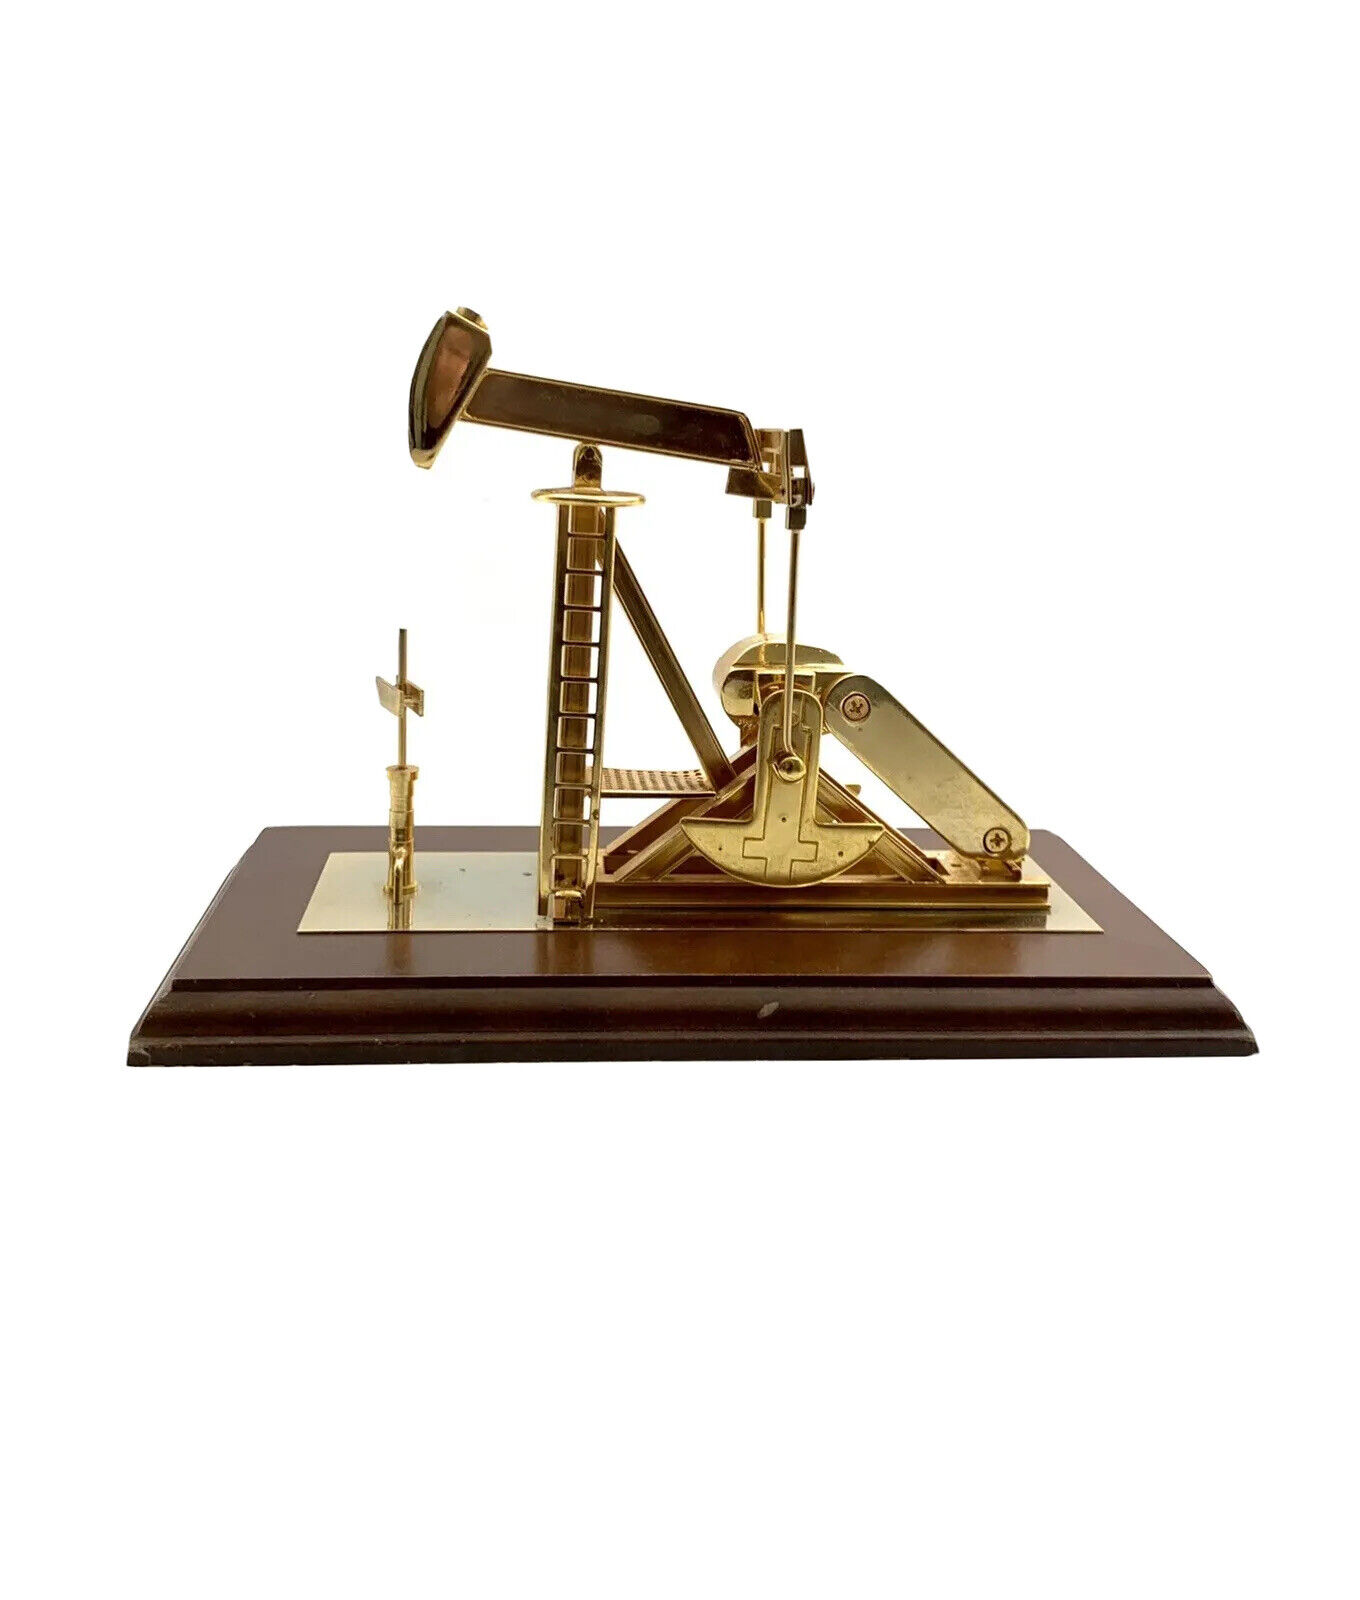 Oil Pump Model Brass on Wooden Base Vintage Replica Oil & Gas Collector Decor